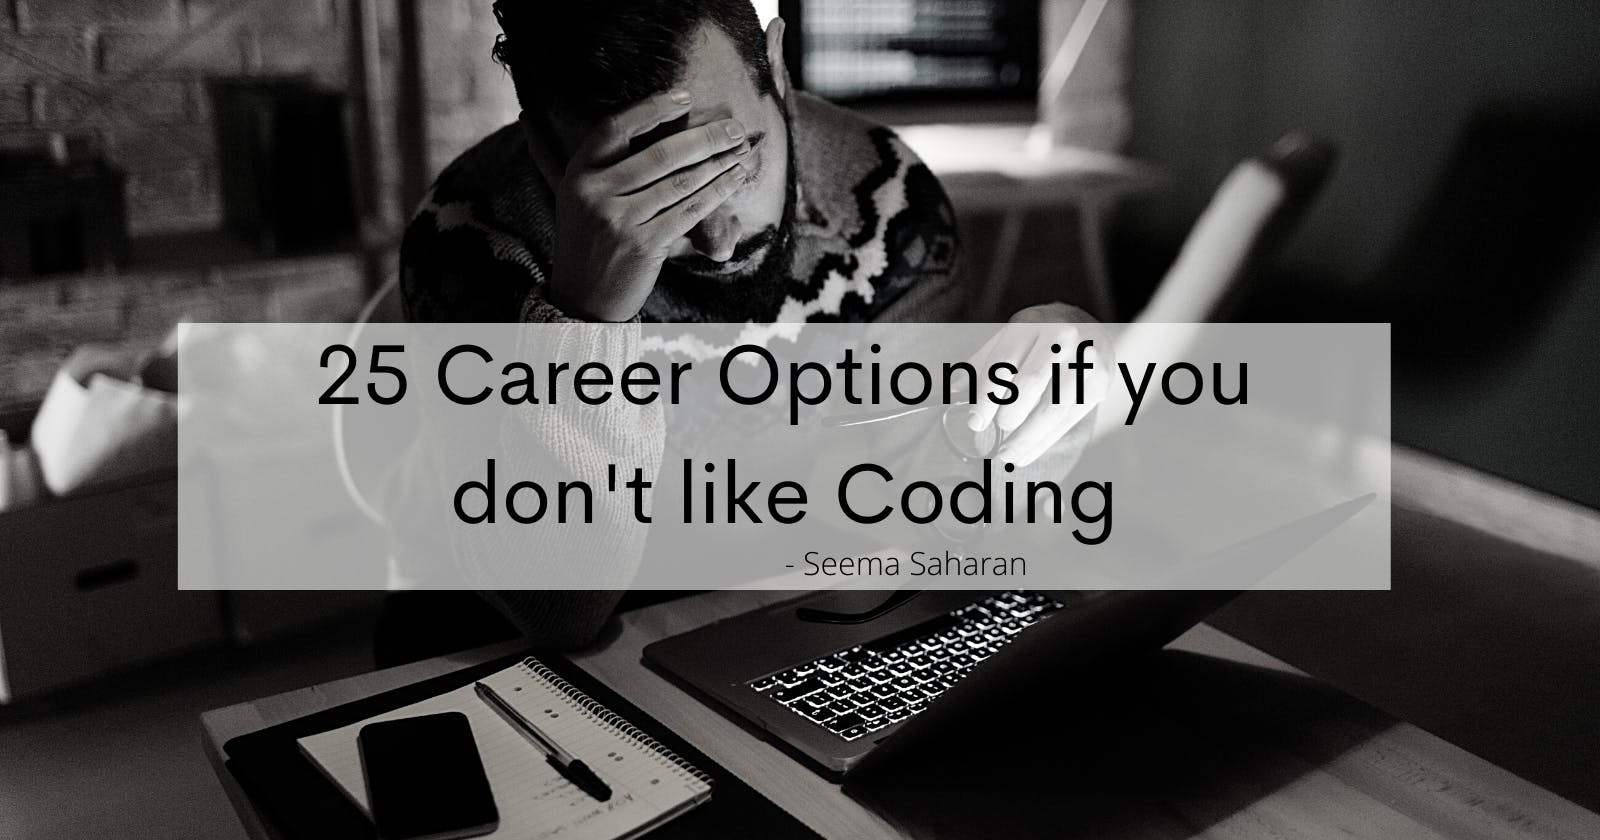 25 Career Options if you don't like Coding